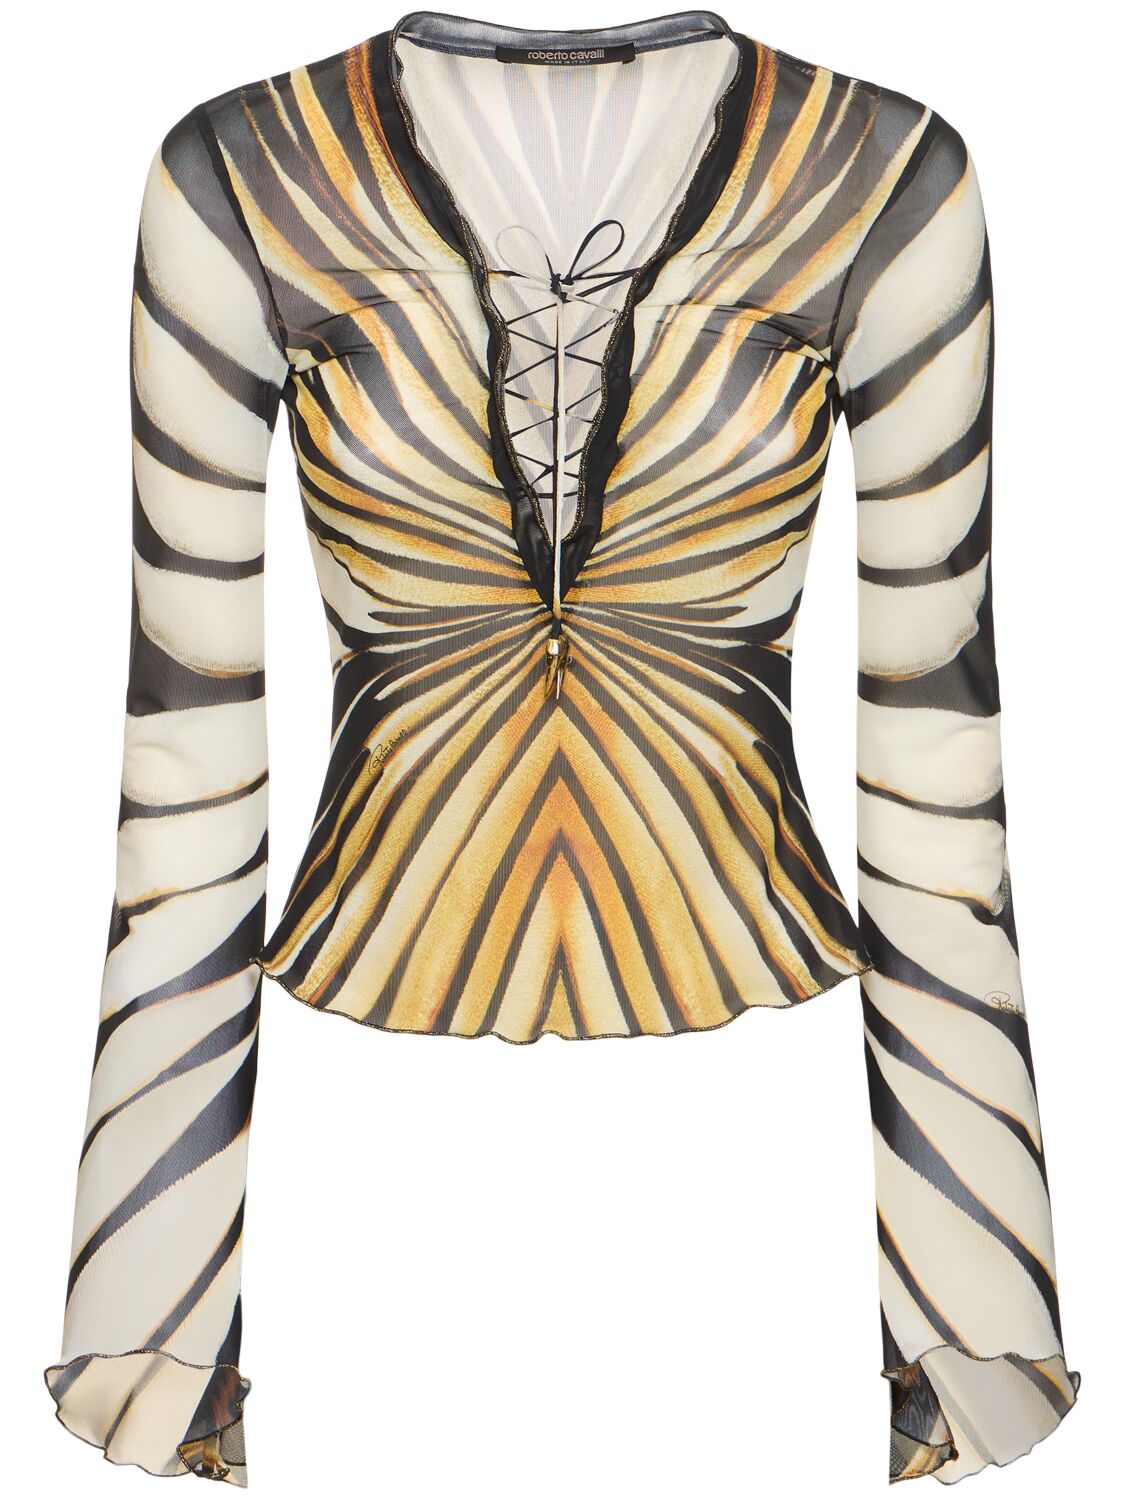 Roberto Cavalli Ray Of Gold Printed Tulle Top In Yellow/black